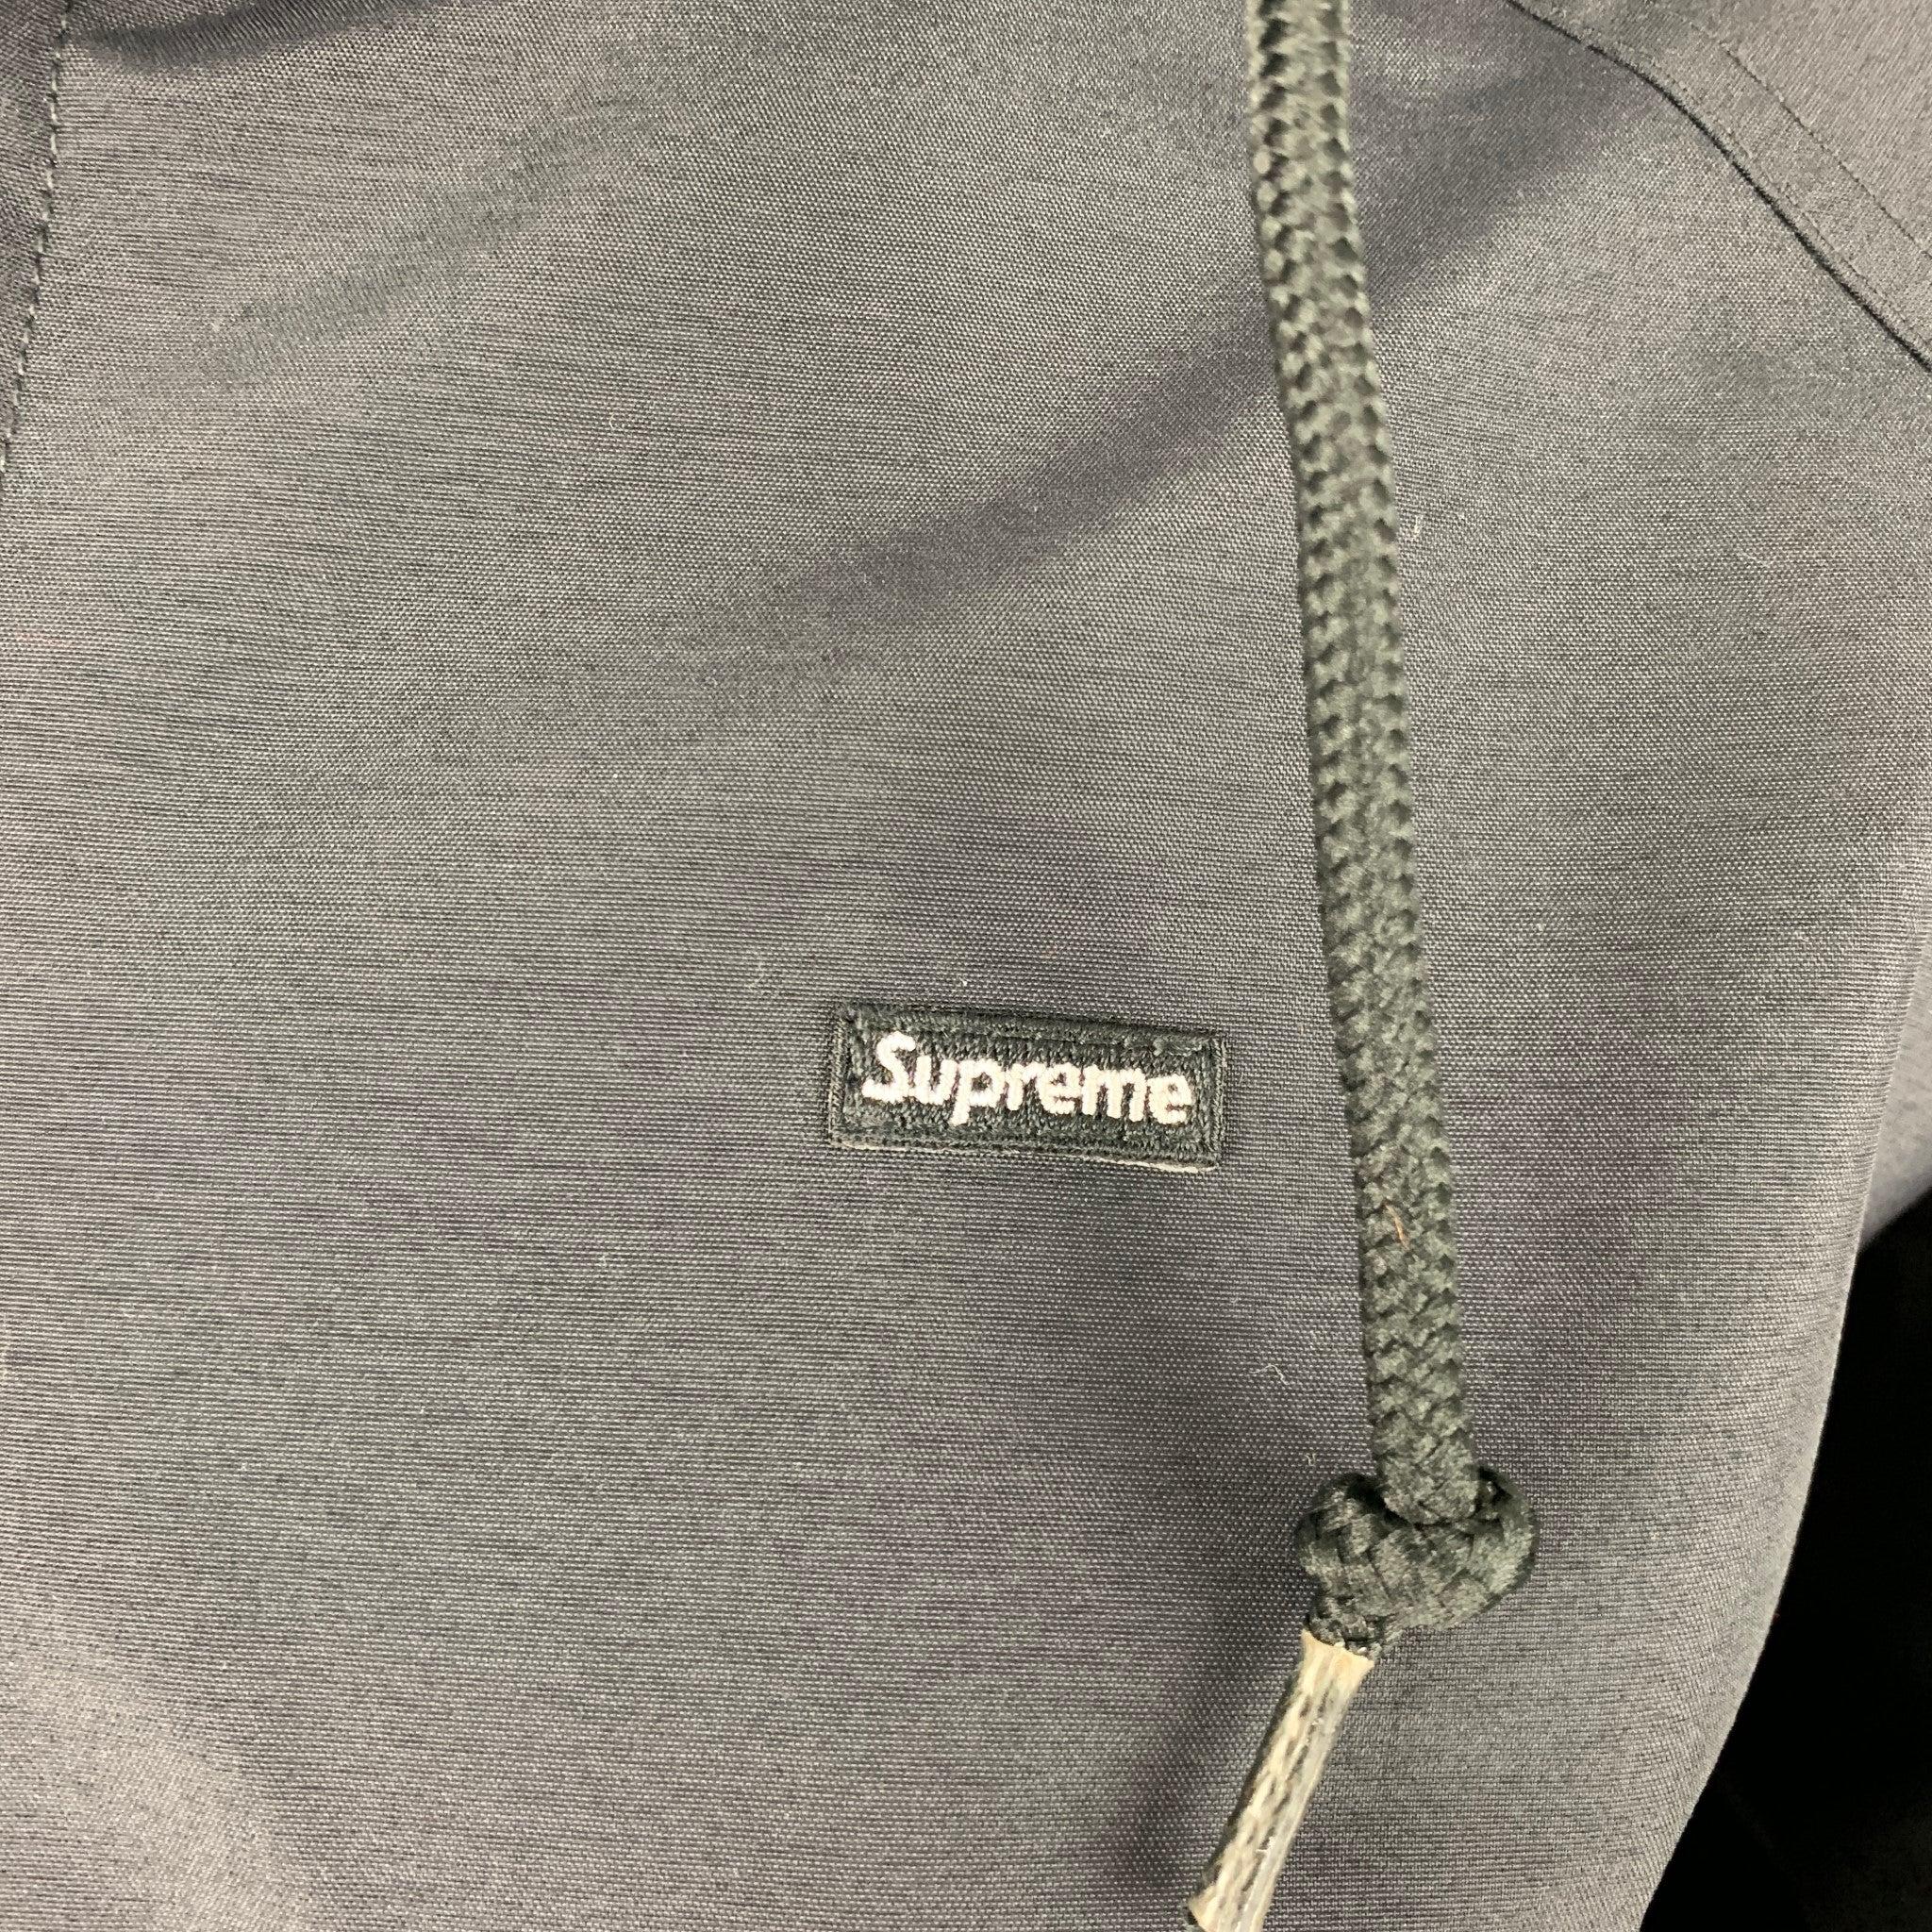 SUPREME jacket
in a
black nylon featuring waterproof GORE-TEX technology, a hooded windbreaker style, and zip up closure.New with Tags. 

Marked:   S 

Measurements: 
 
Shoulder: 17 inches Bust: 42 inches Sleeve: 25 inches Length: 24 inches 
  
  
